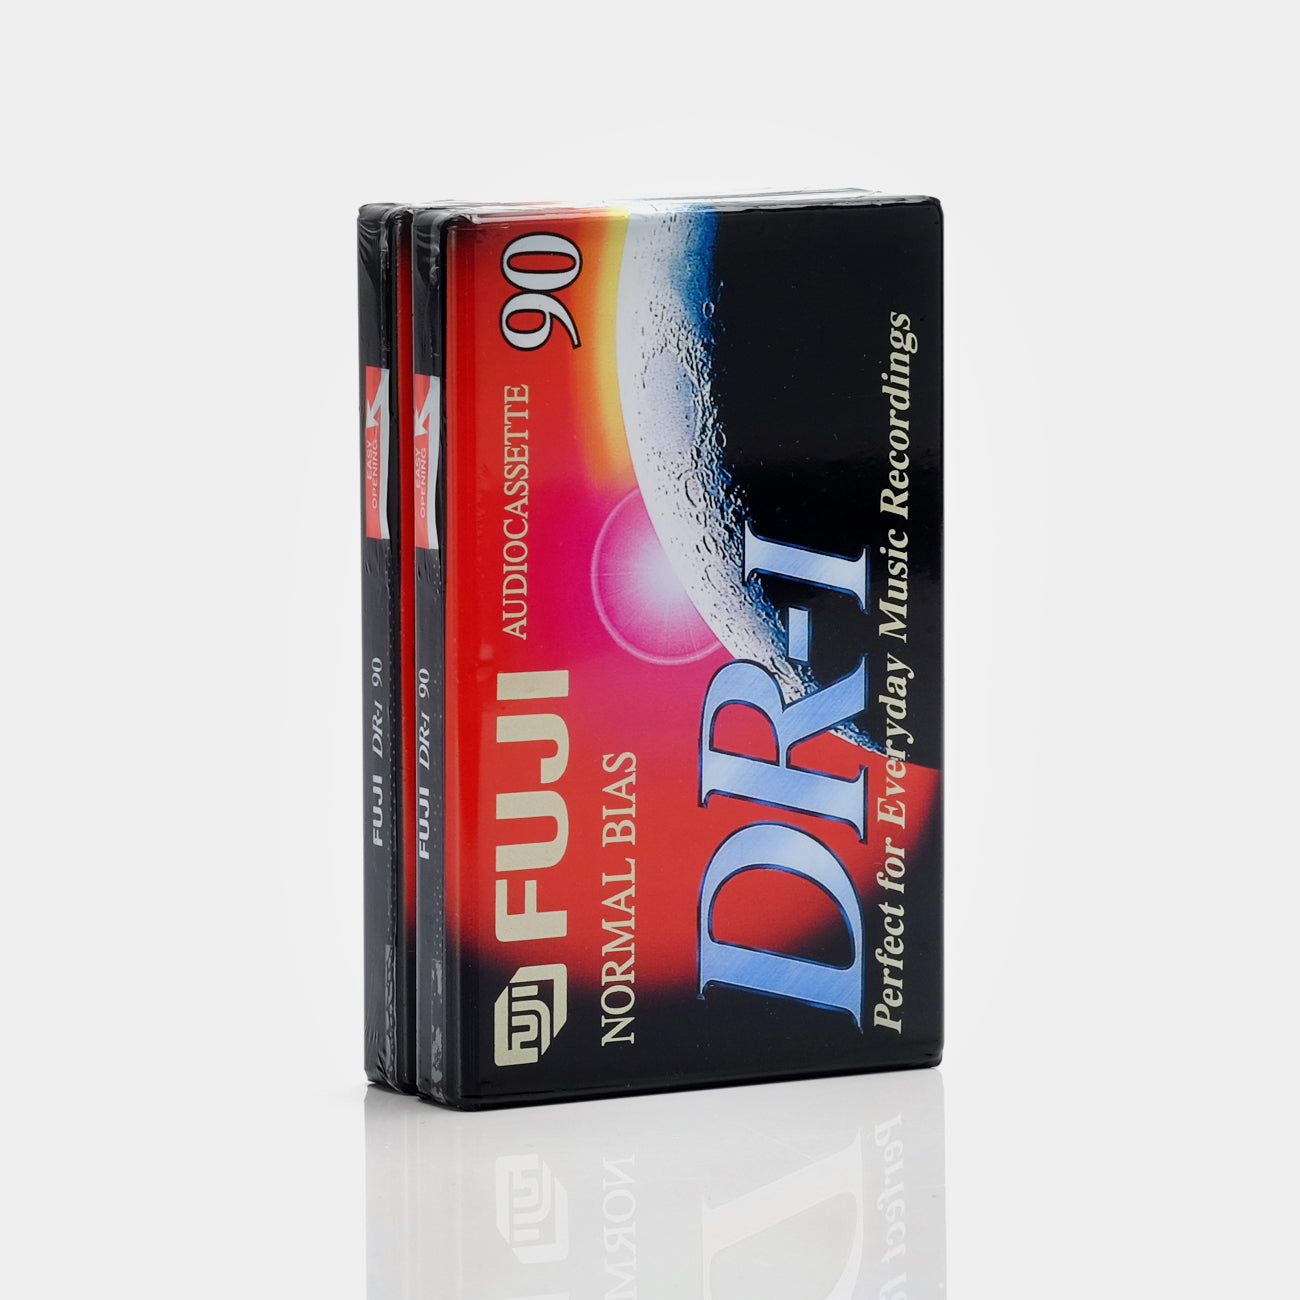 Fuji DR-I 90 Type I Blank Recordable Cassette Tapes (2 Pack)